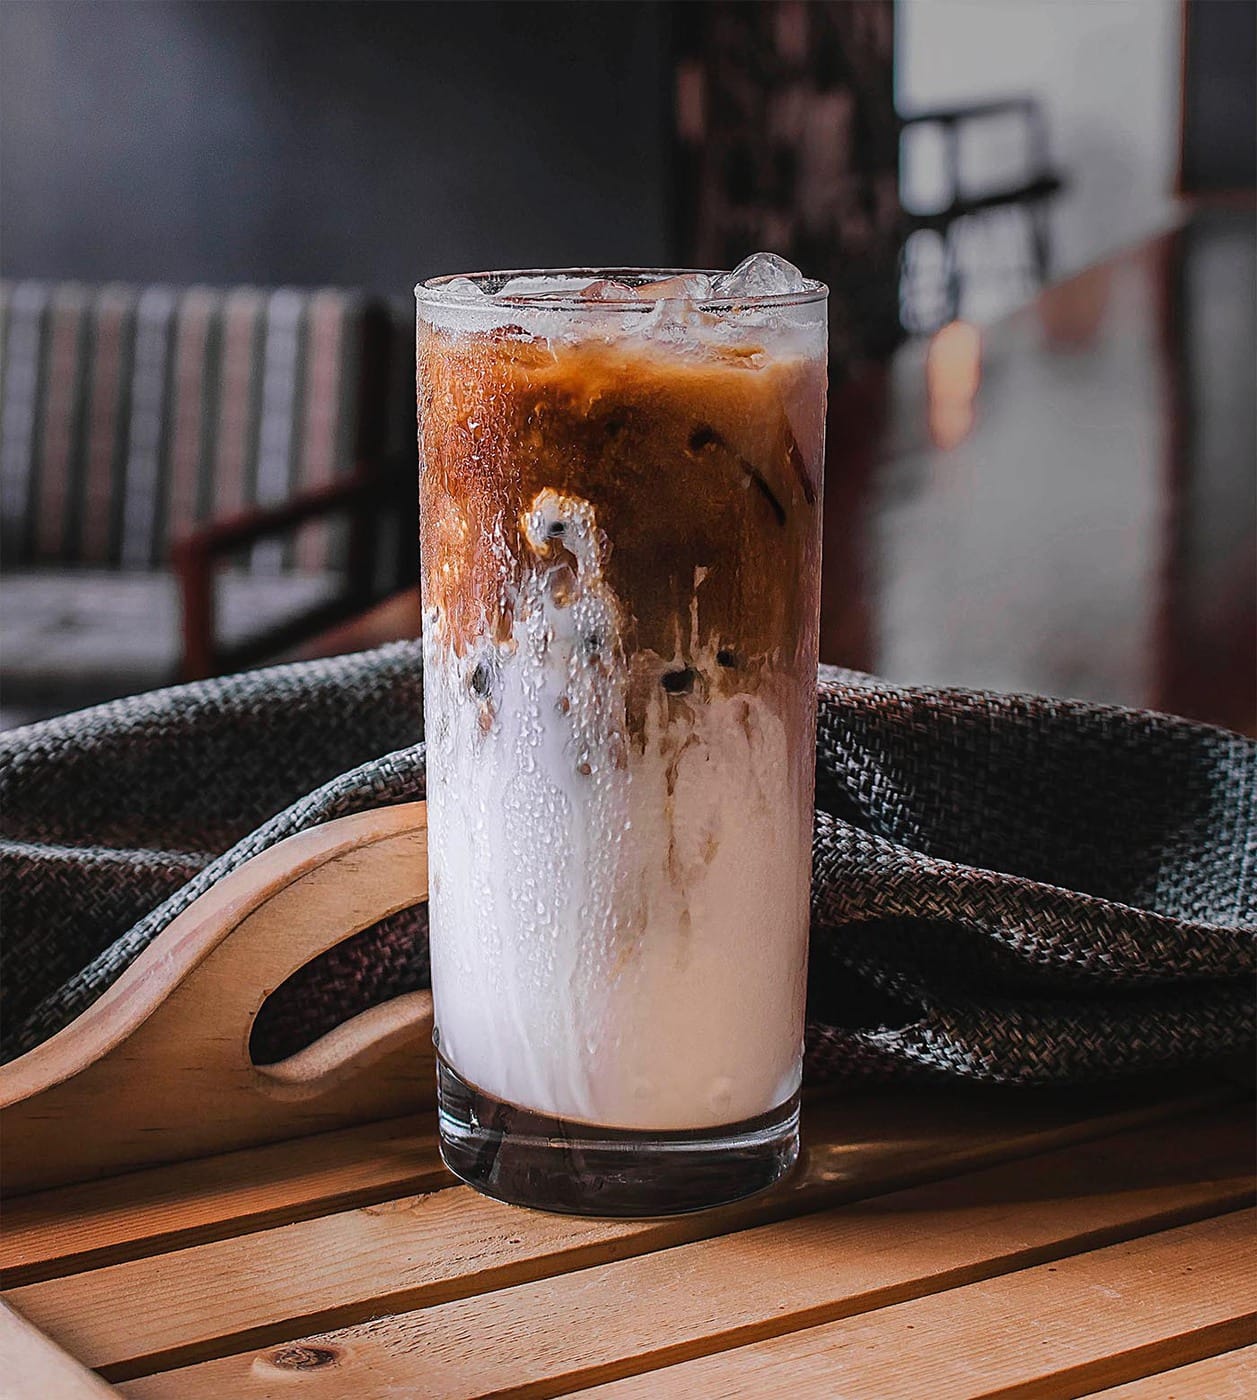 How to Make the Best Cold Brew Coffee